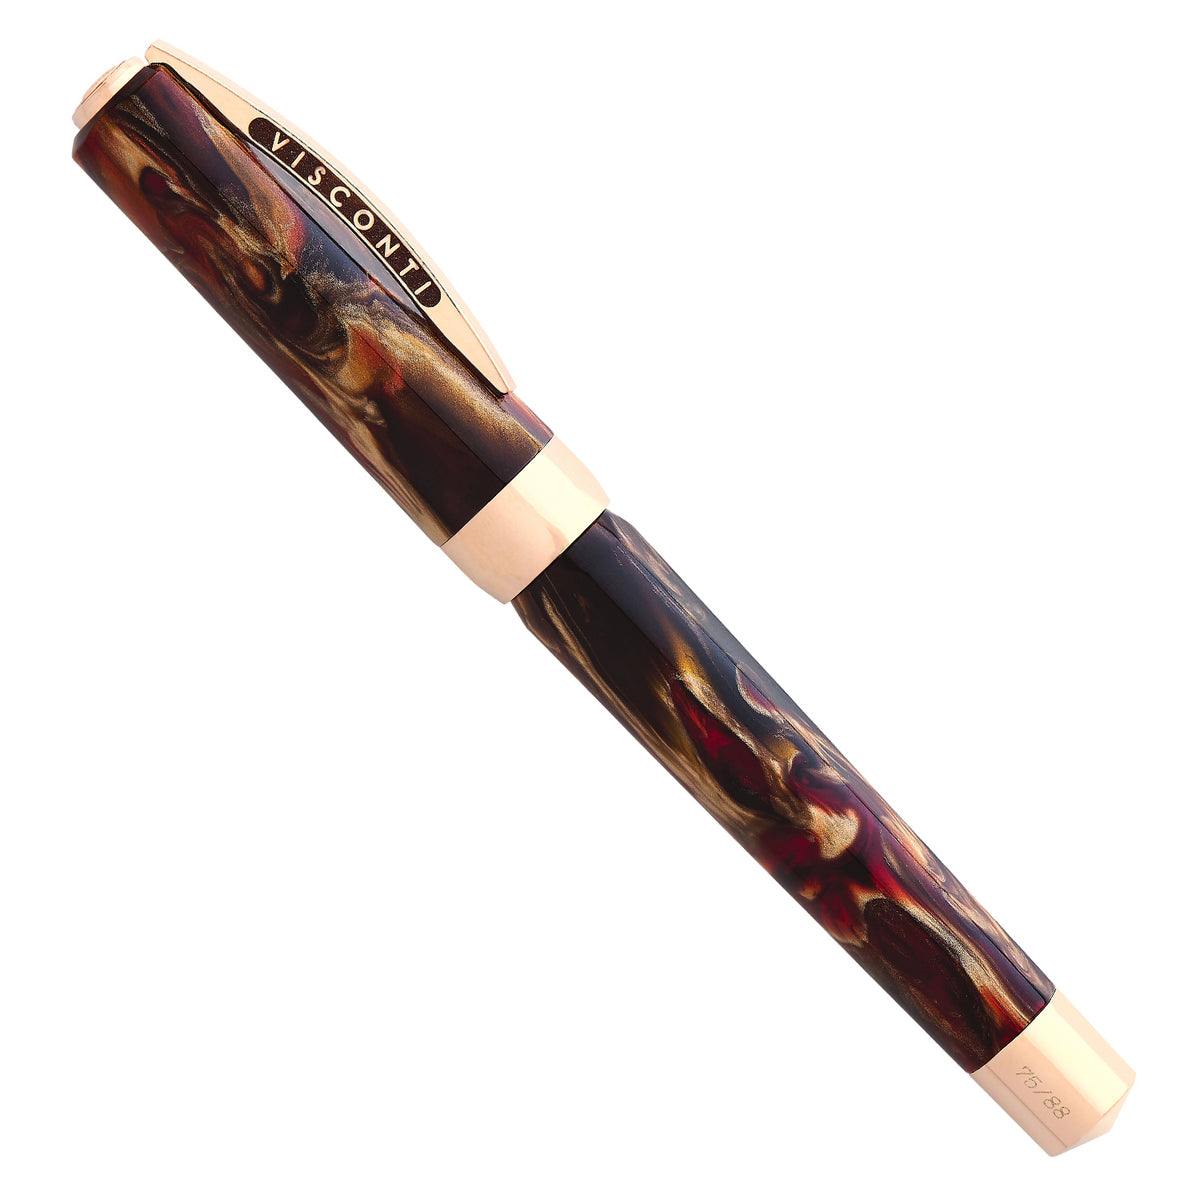 A Visconti Opera Master Firestorm fountain pen with a marbled design. (Brand Name: Coles of London)